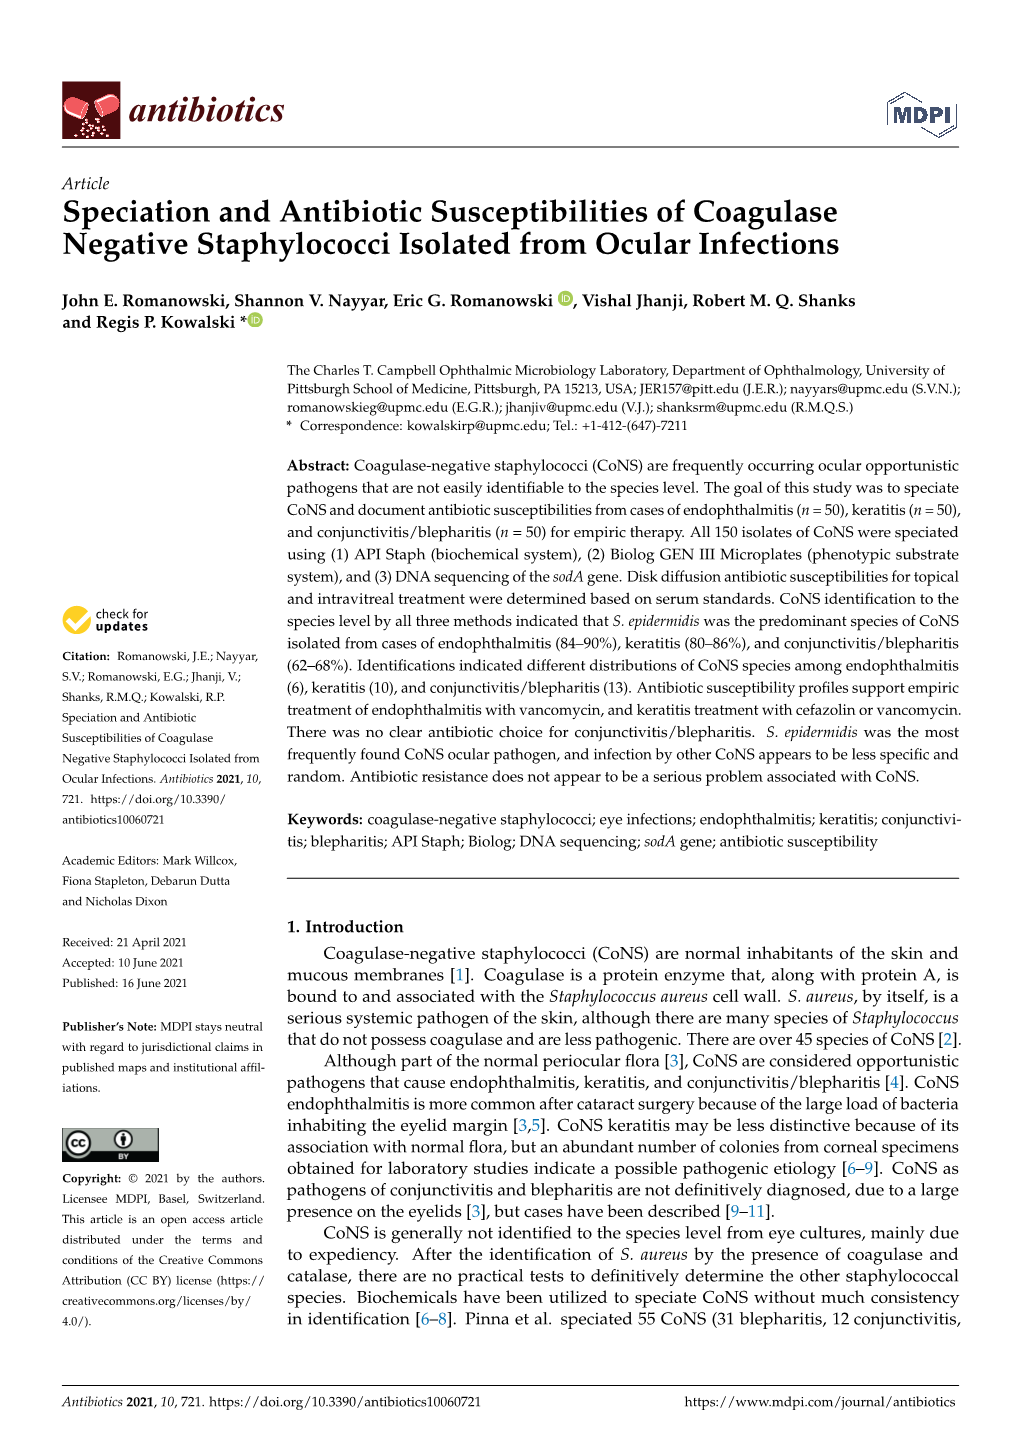 Speciation and Antibiotic Susceptibilities of Coagulase Negative Staphylococci Isolated from Ocular Infections